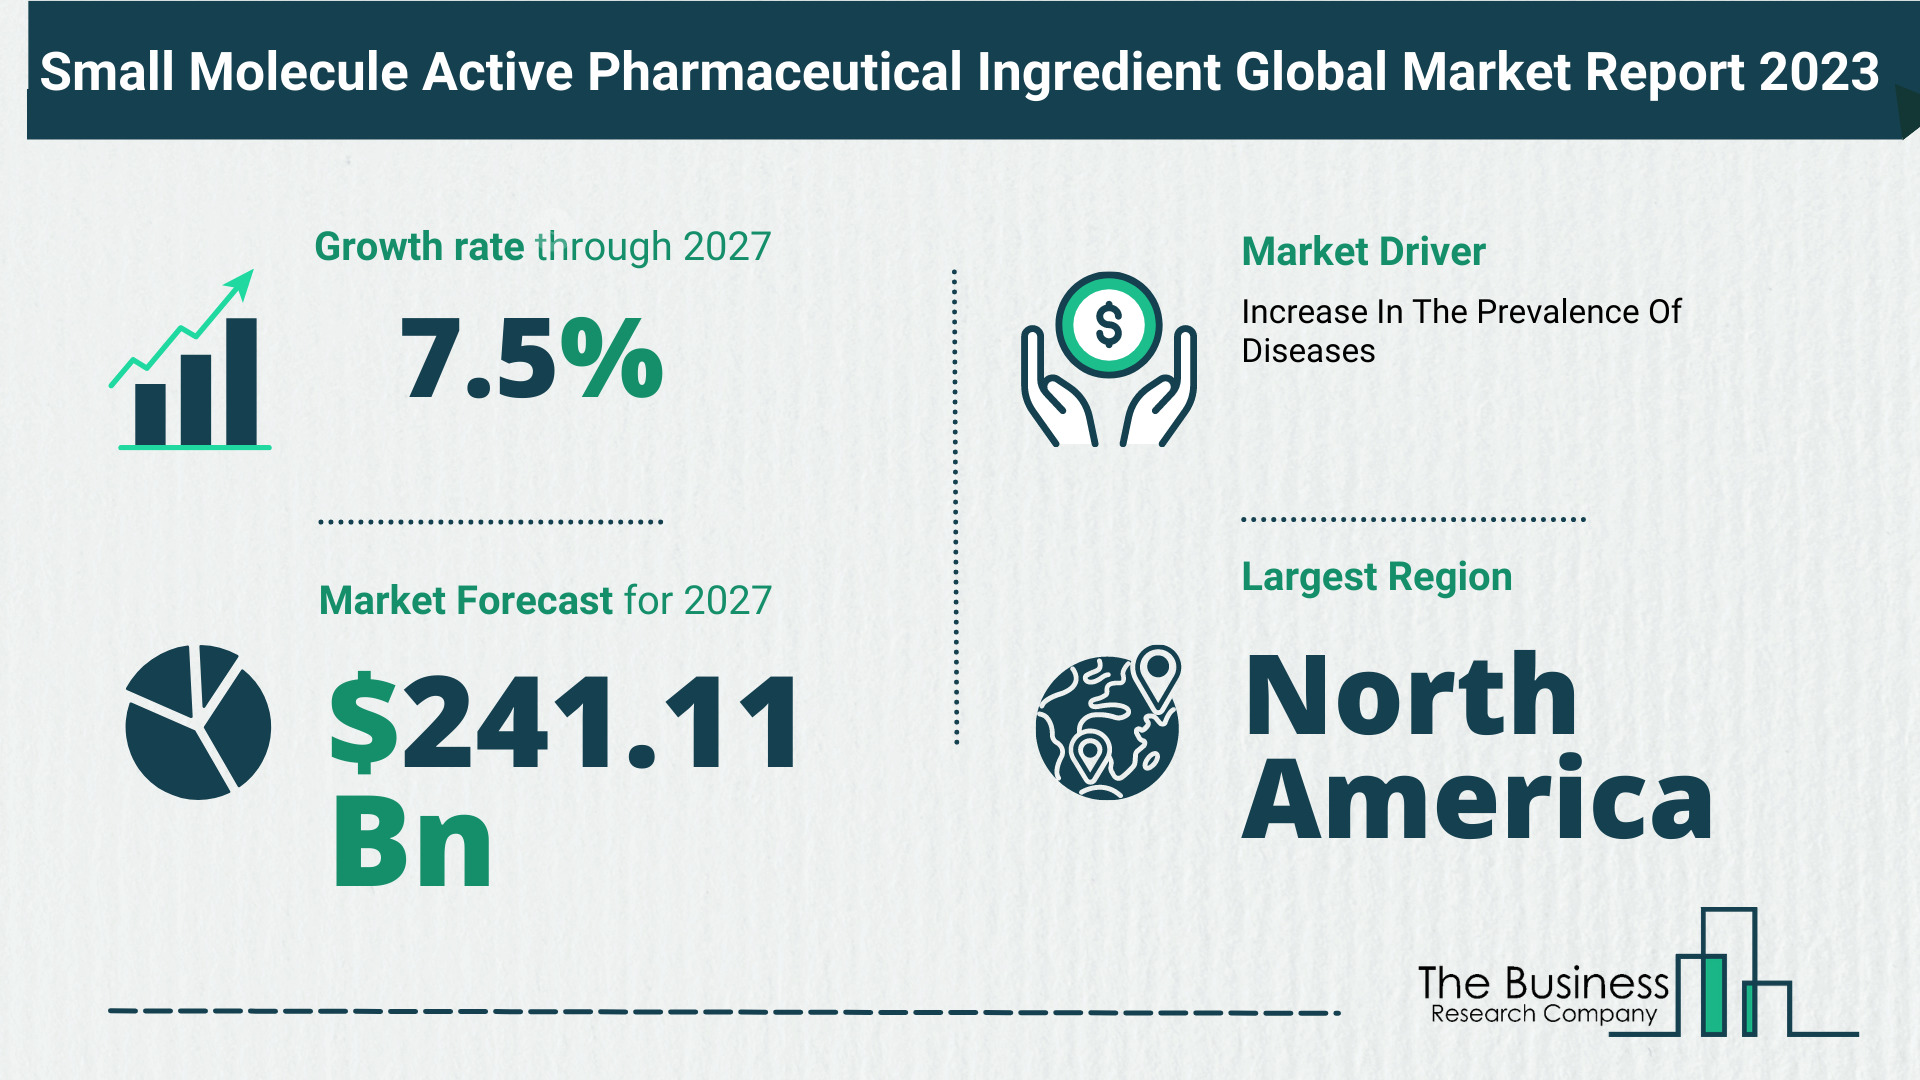 What Is The Forecast Growth Rate For The Small Molecule Active Pharmaceutical Ingredient Market?